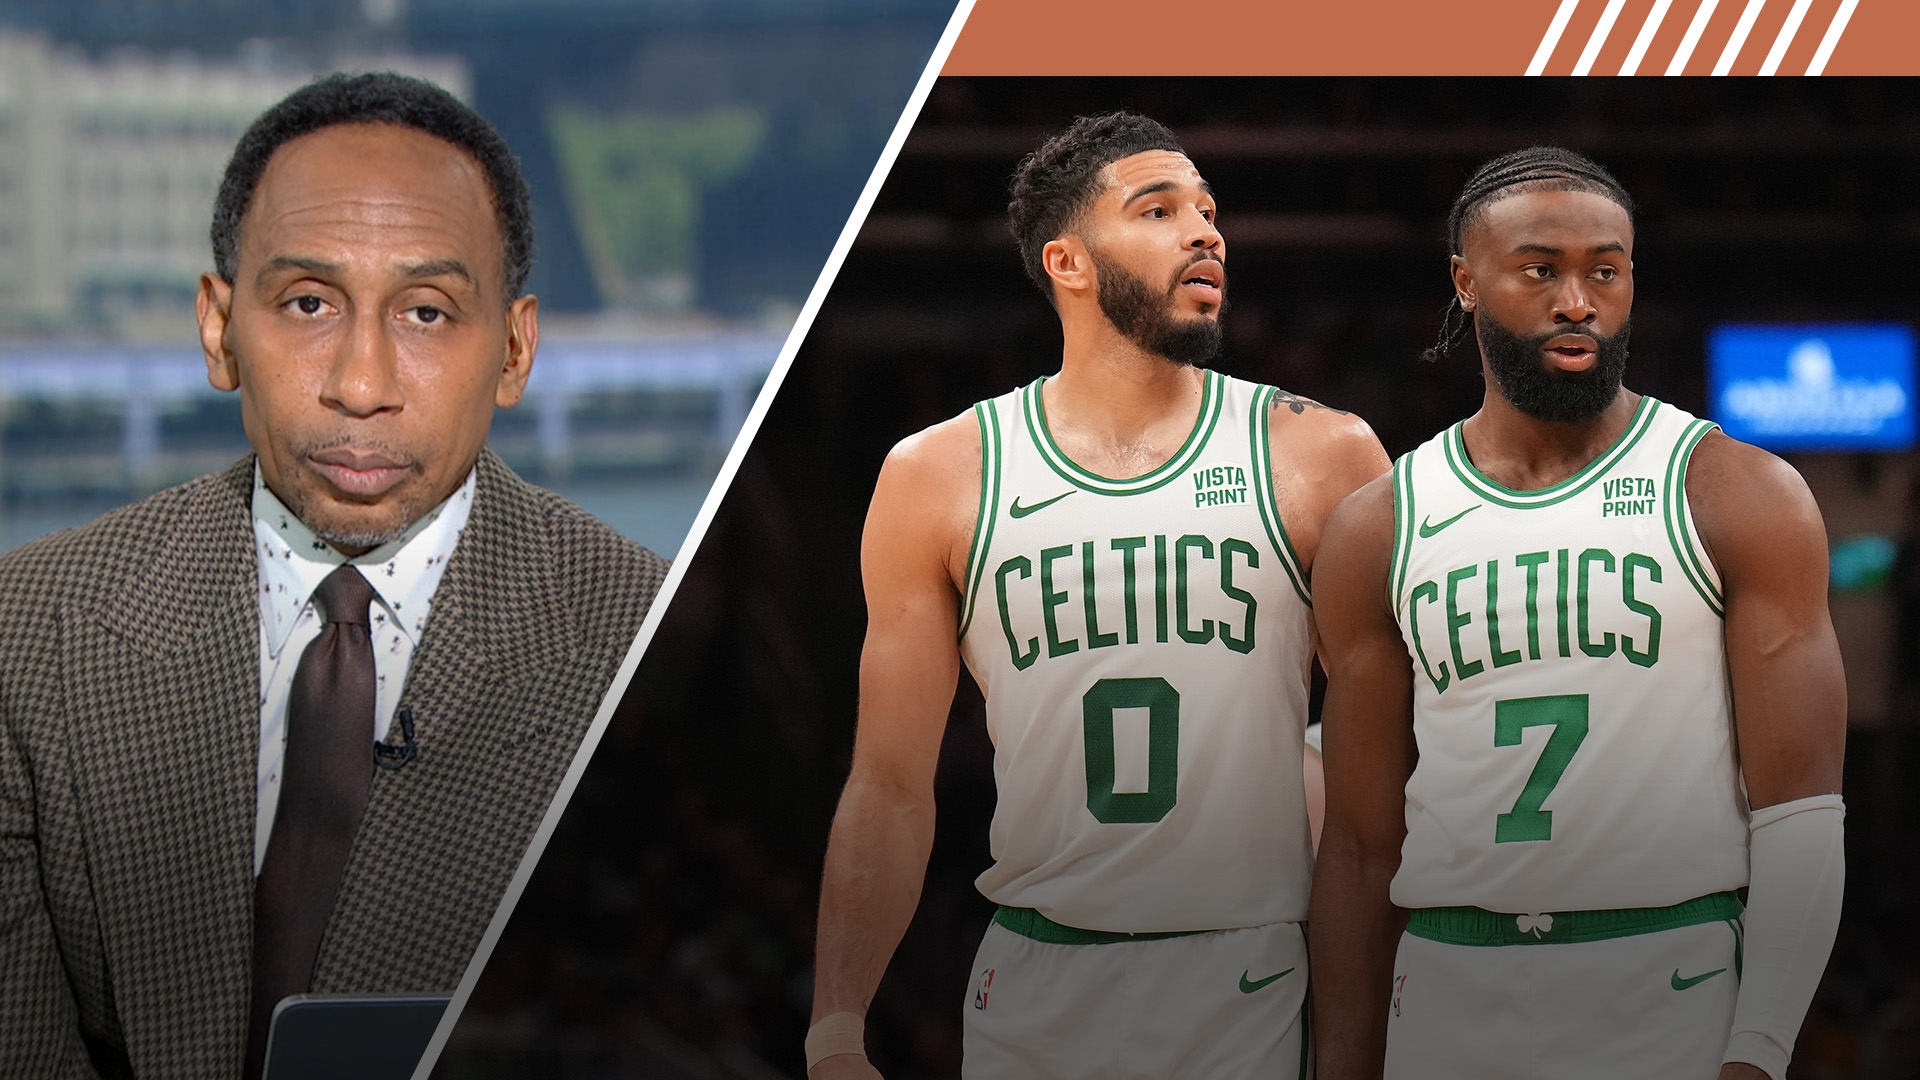 Stephen A. on Celtics: 'It's an epic failure if they don't win the championship'